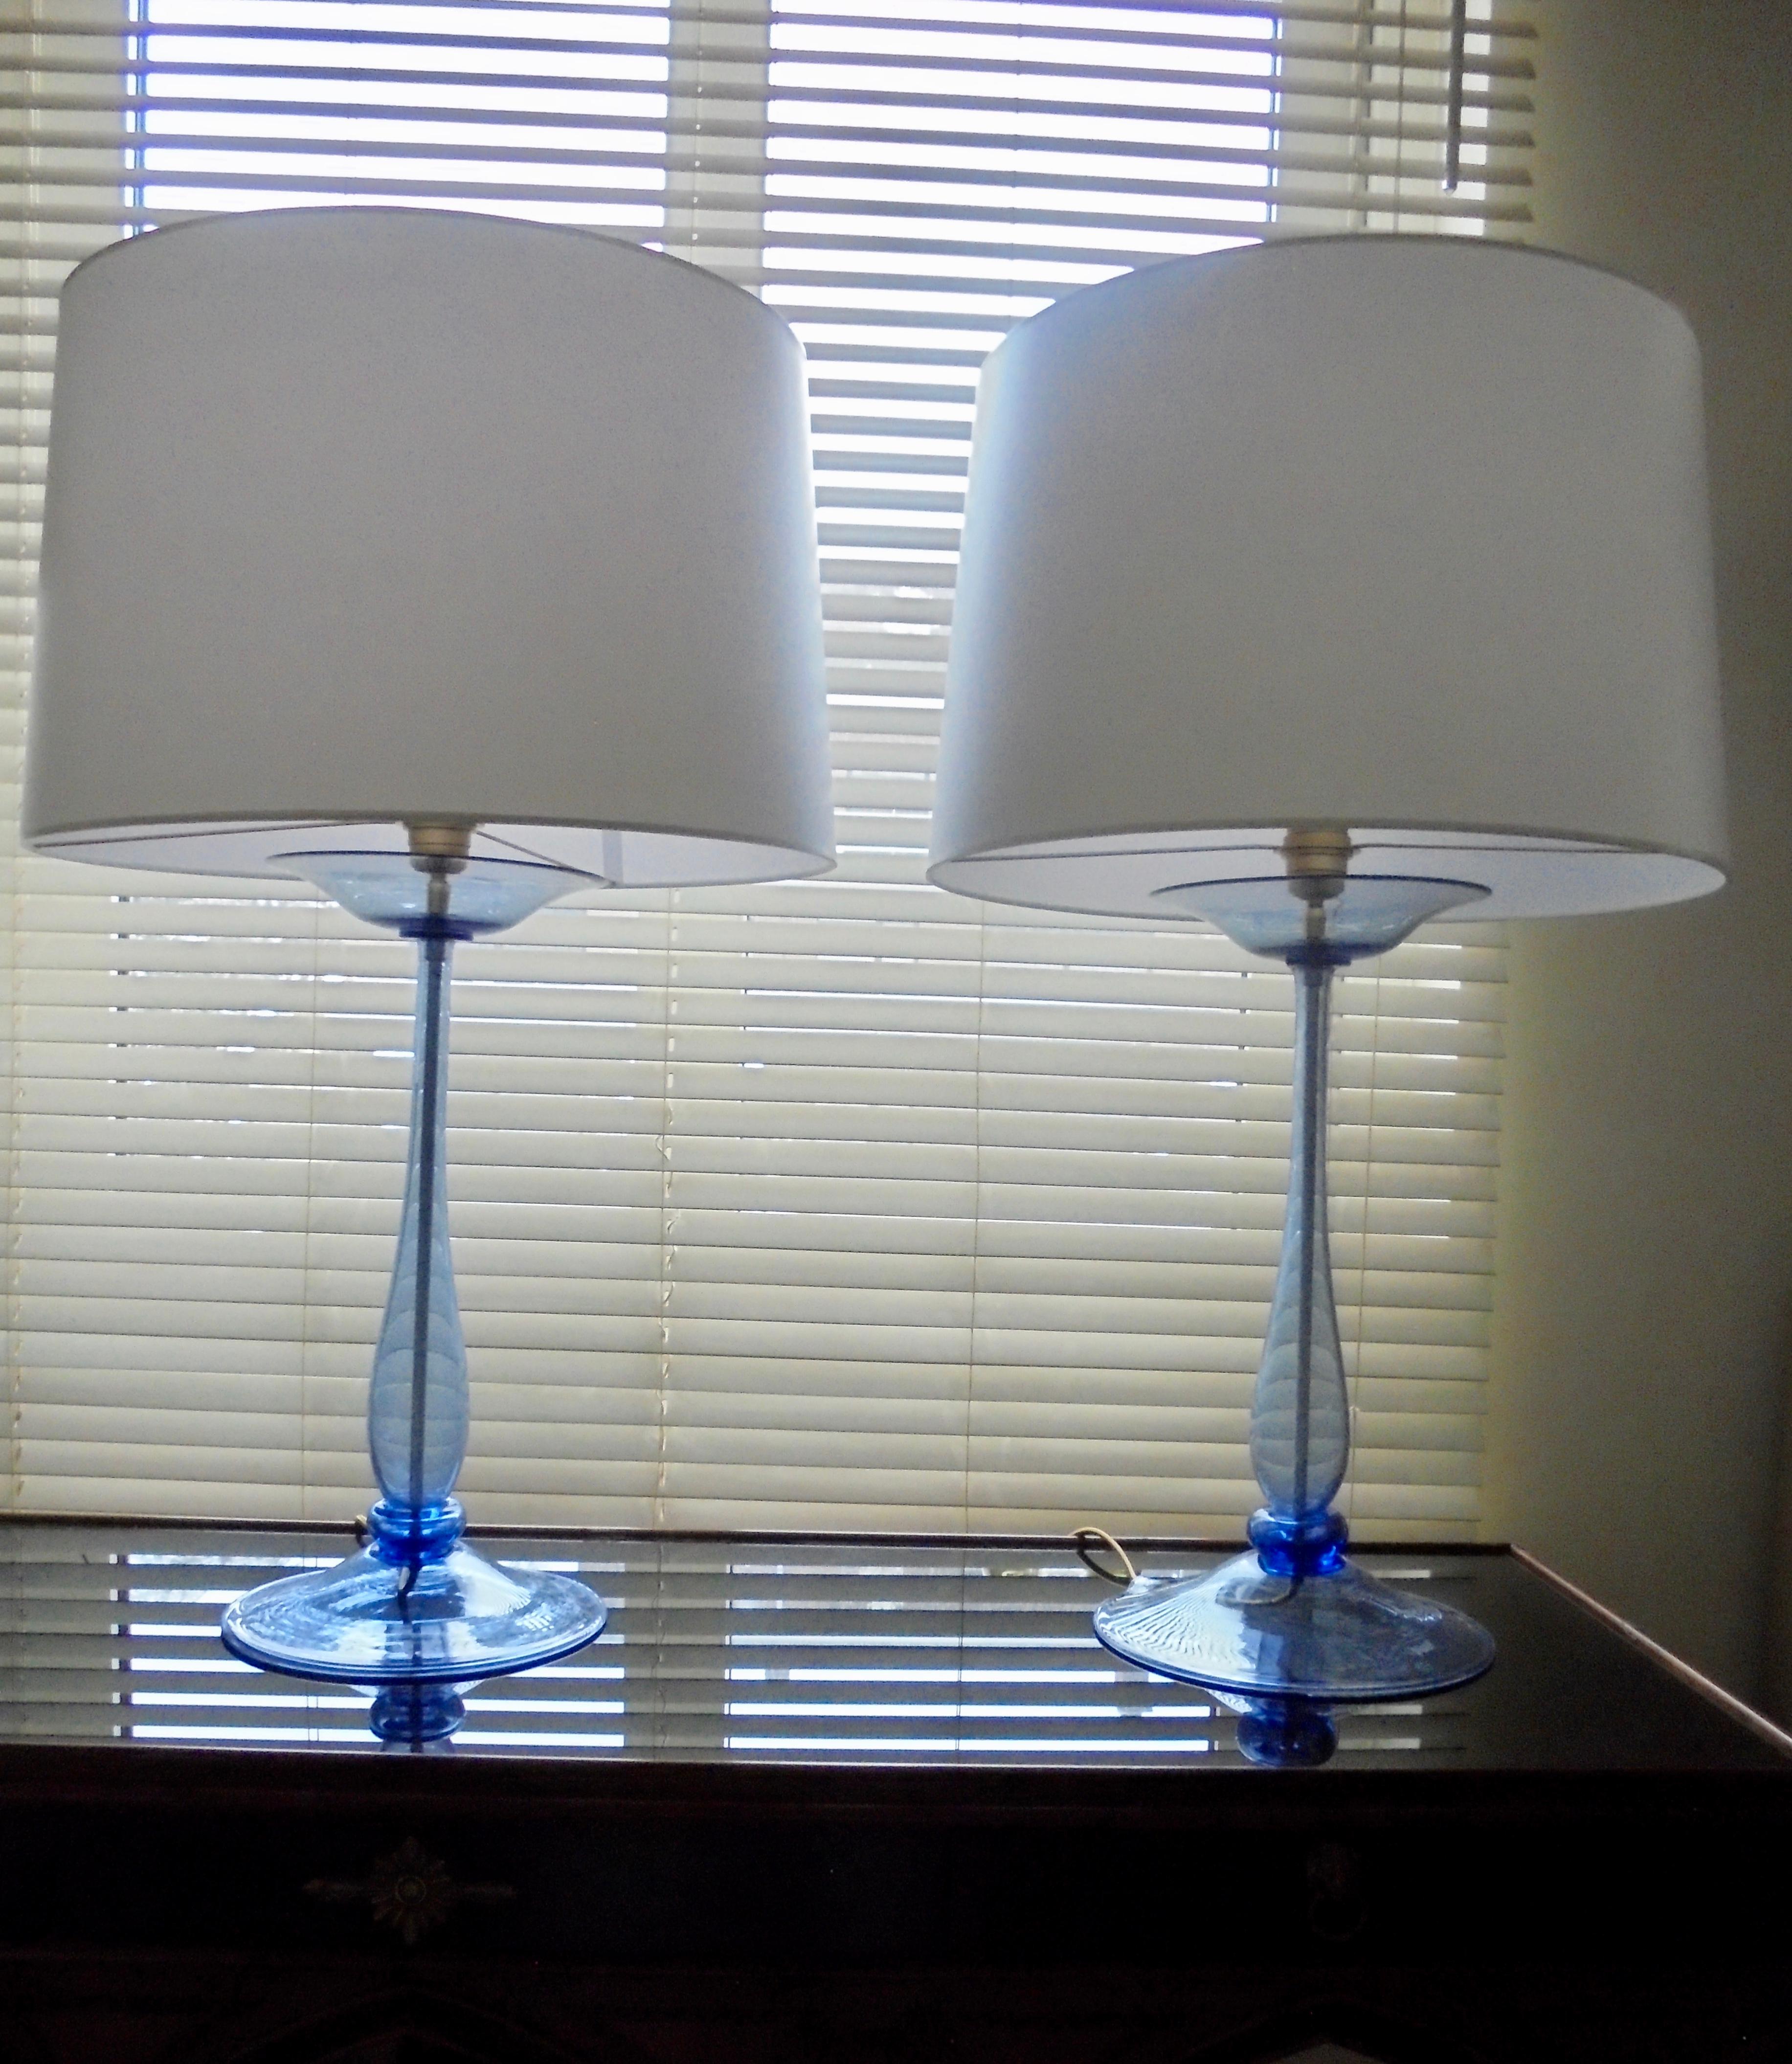 Fine pair of Murano lamps (Venini- Cappellin &Co).
One light, fully rewired with new lampshades,
circa1930.